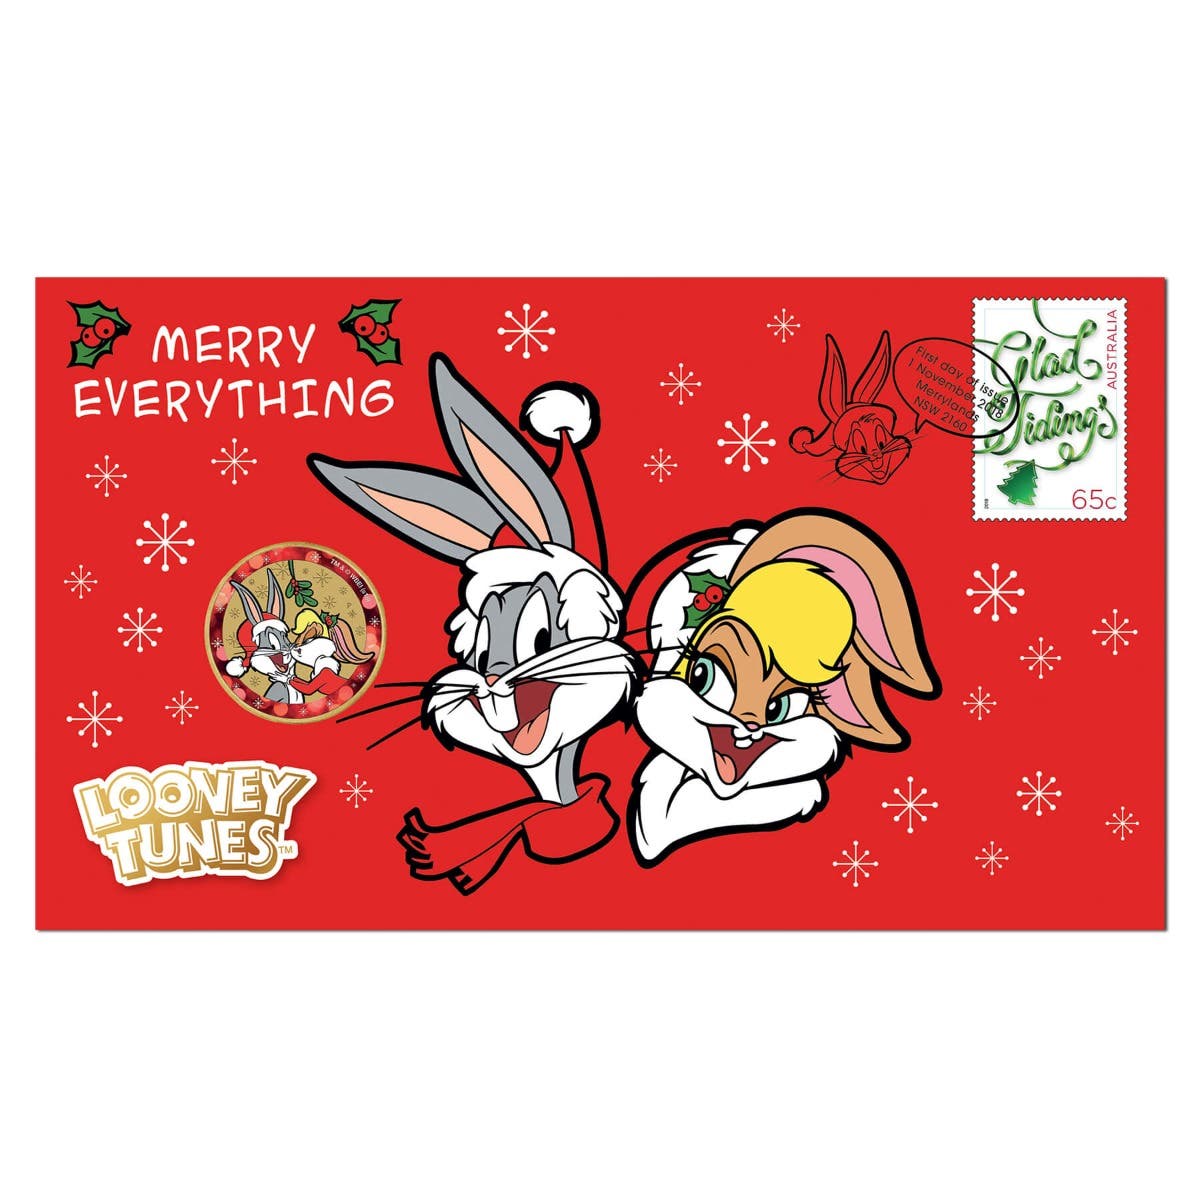 Looney Tunes Christmas 2018 $1 Stamp & Coin Cover